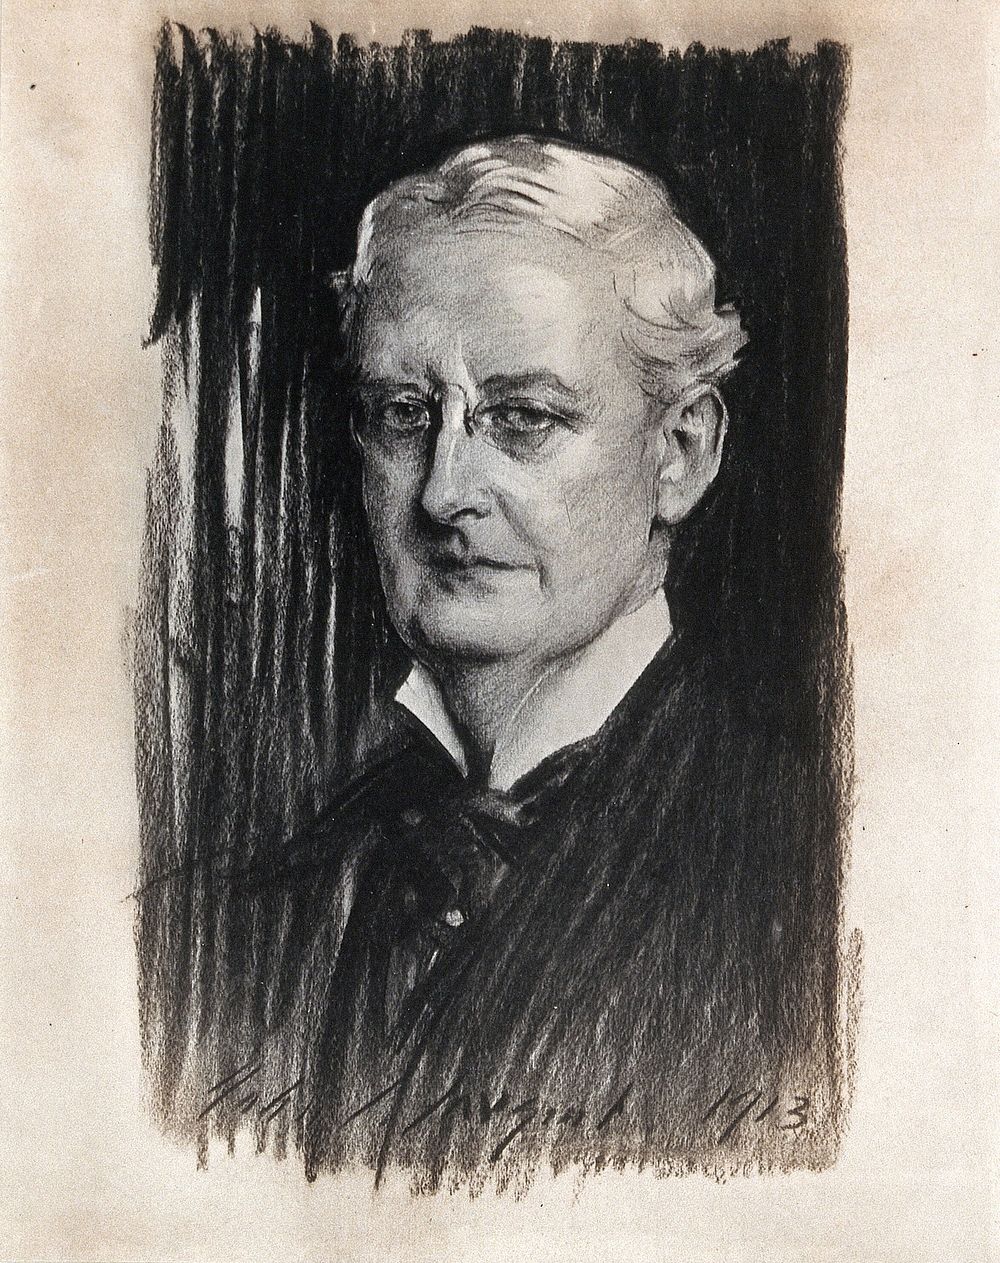 Sir St. Clair Thomson. Photograph by Paul Laib after J.S. Sargent, 1913.